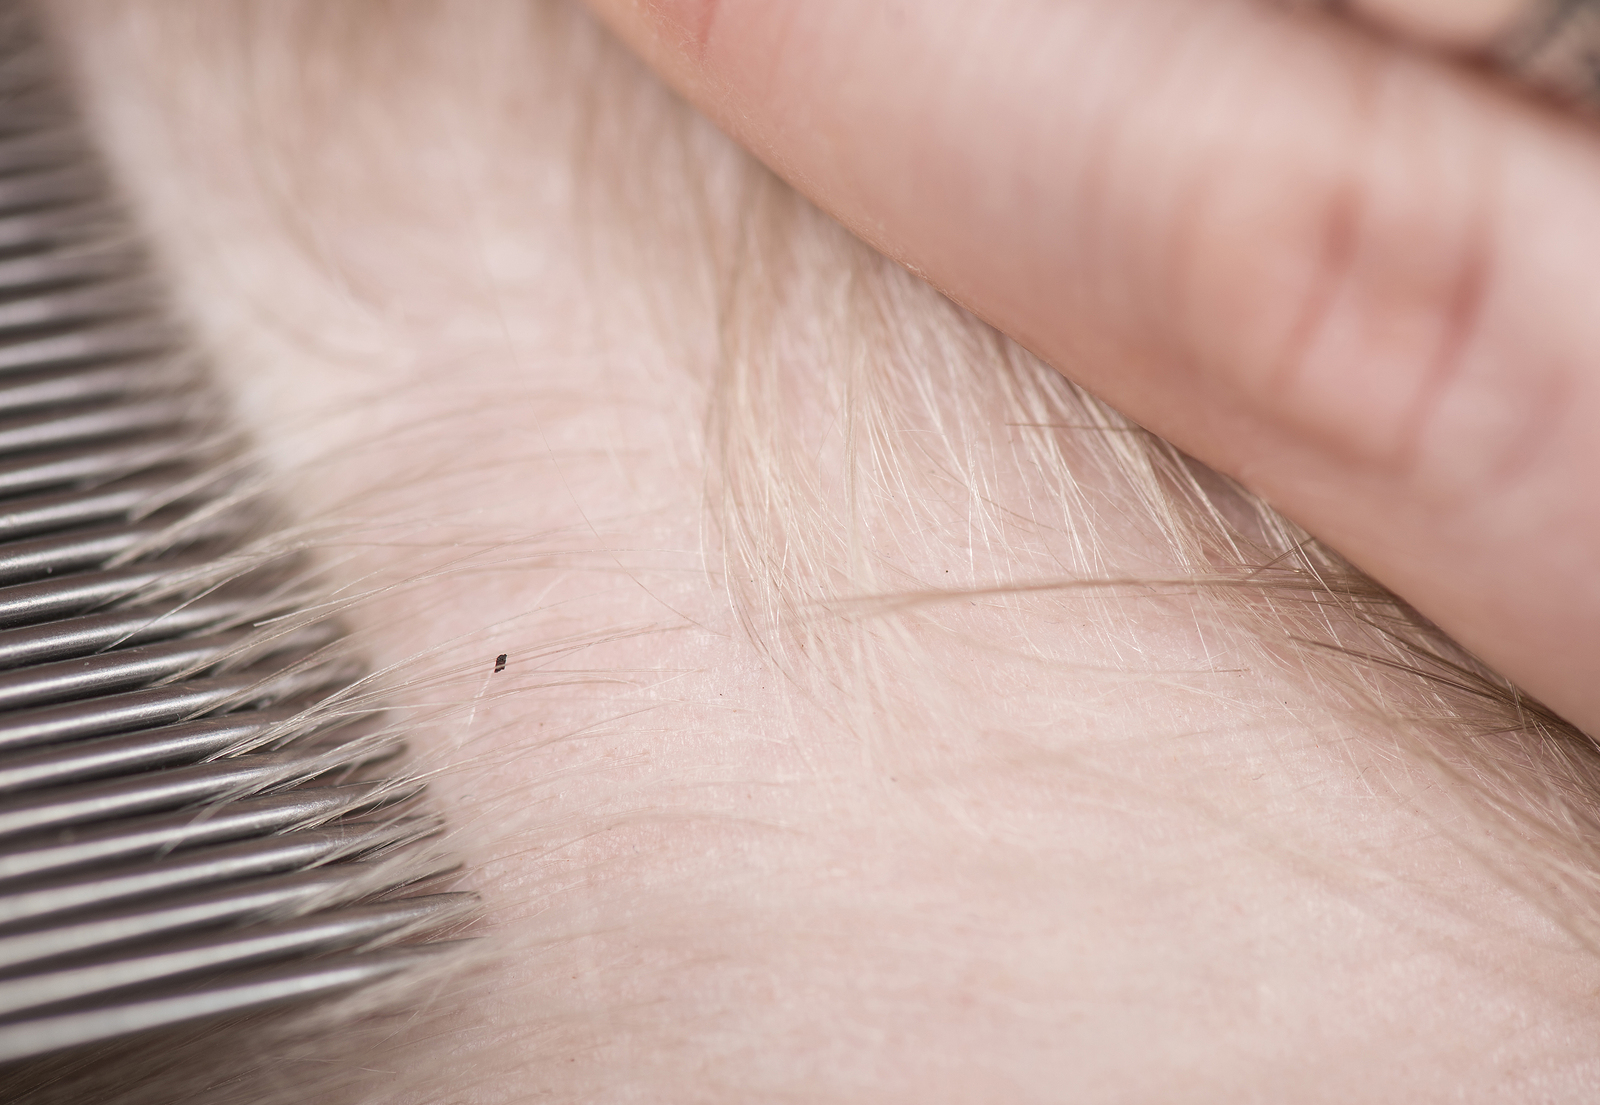 “Super lice” found in 25 states – resistant to typical treatments